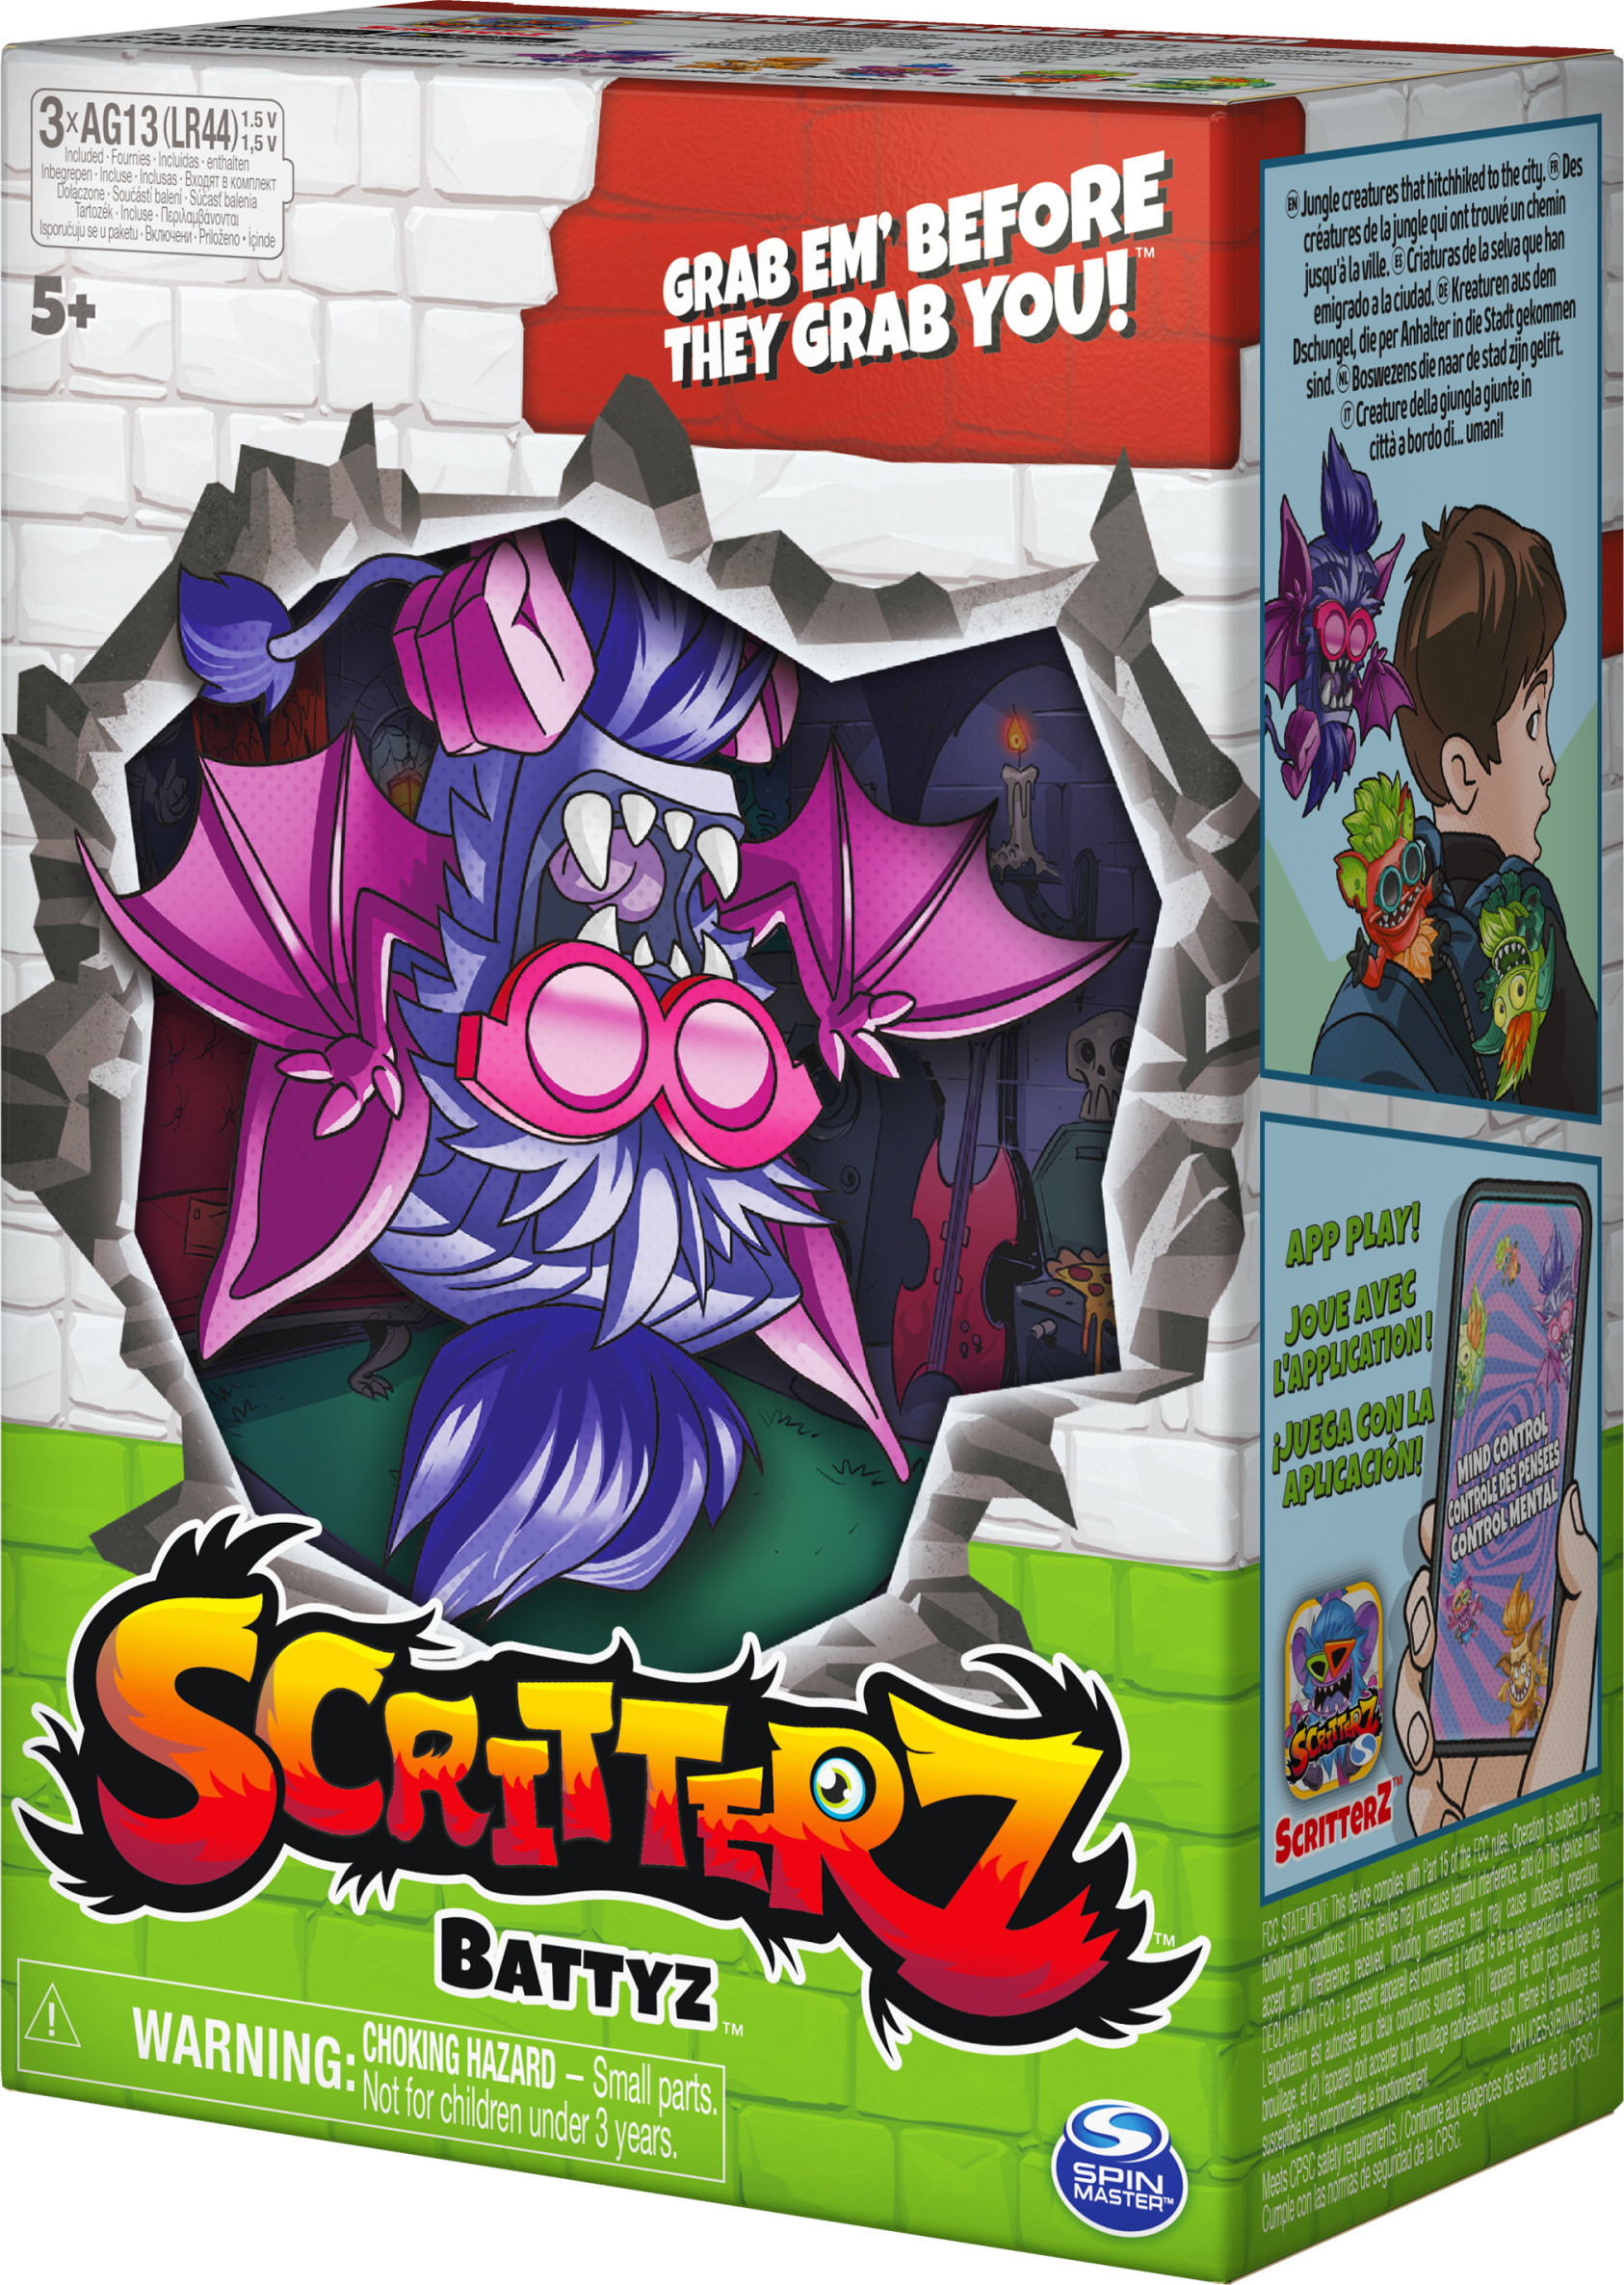 Scritterz, Battyz Interactive Collectible Jungle Creature Toy with Sounds and Movement, for Kids Aged 5 and up - image 7 of 8